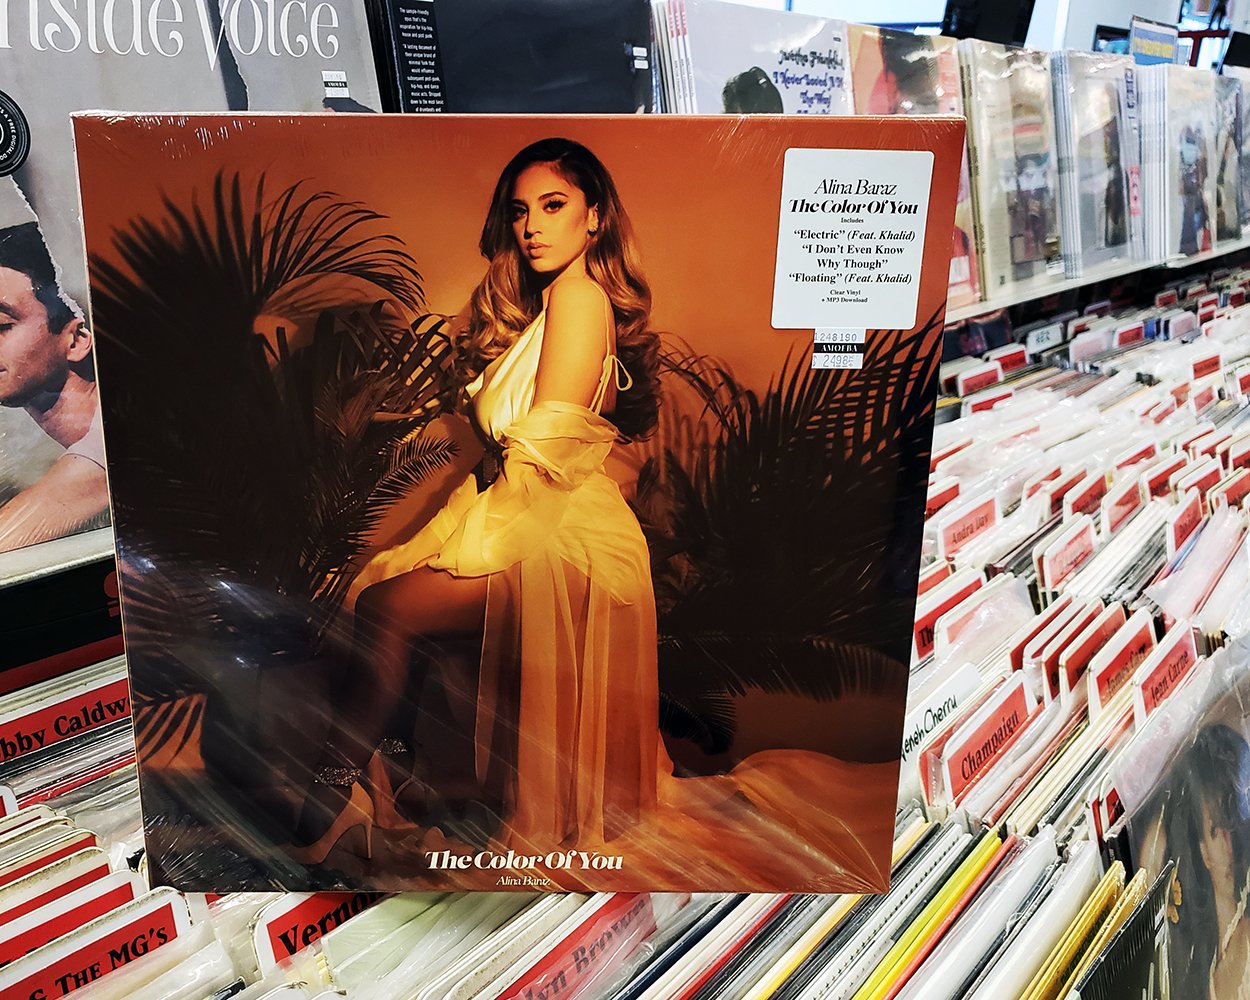 Amoeba Music on Twitter: ""The Color of You," the new project from @ alinabaraz, is available now on CD and vinyl via @MomAndPopMusic. it here: https://t.co/qv7X8WMptq https://t.co/UqXzX5fQ6v" / Twitter